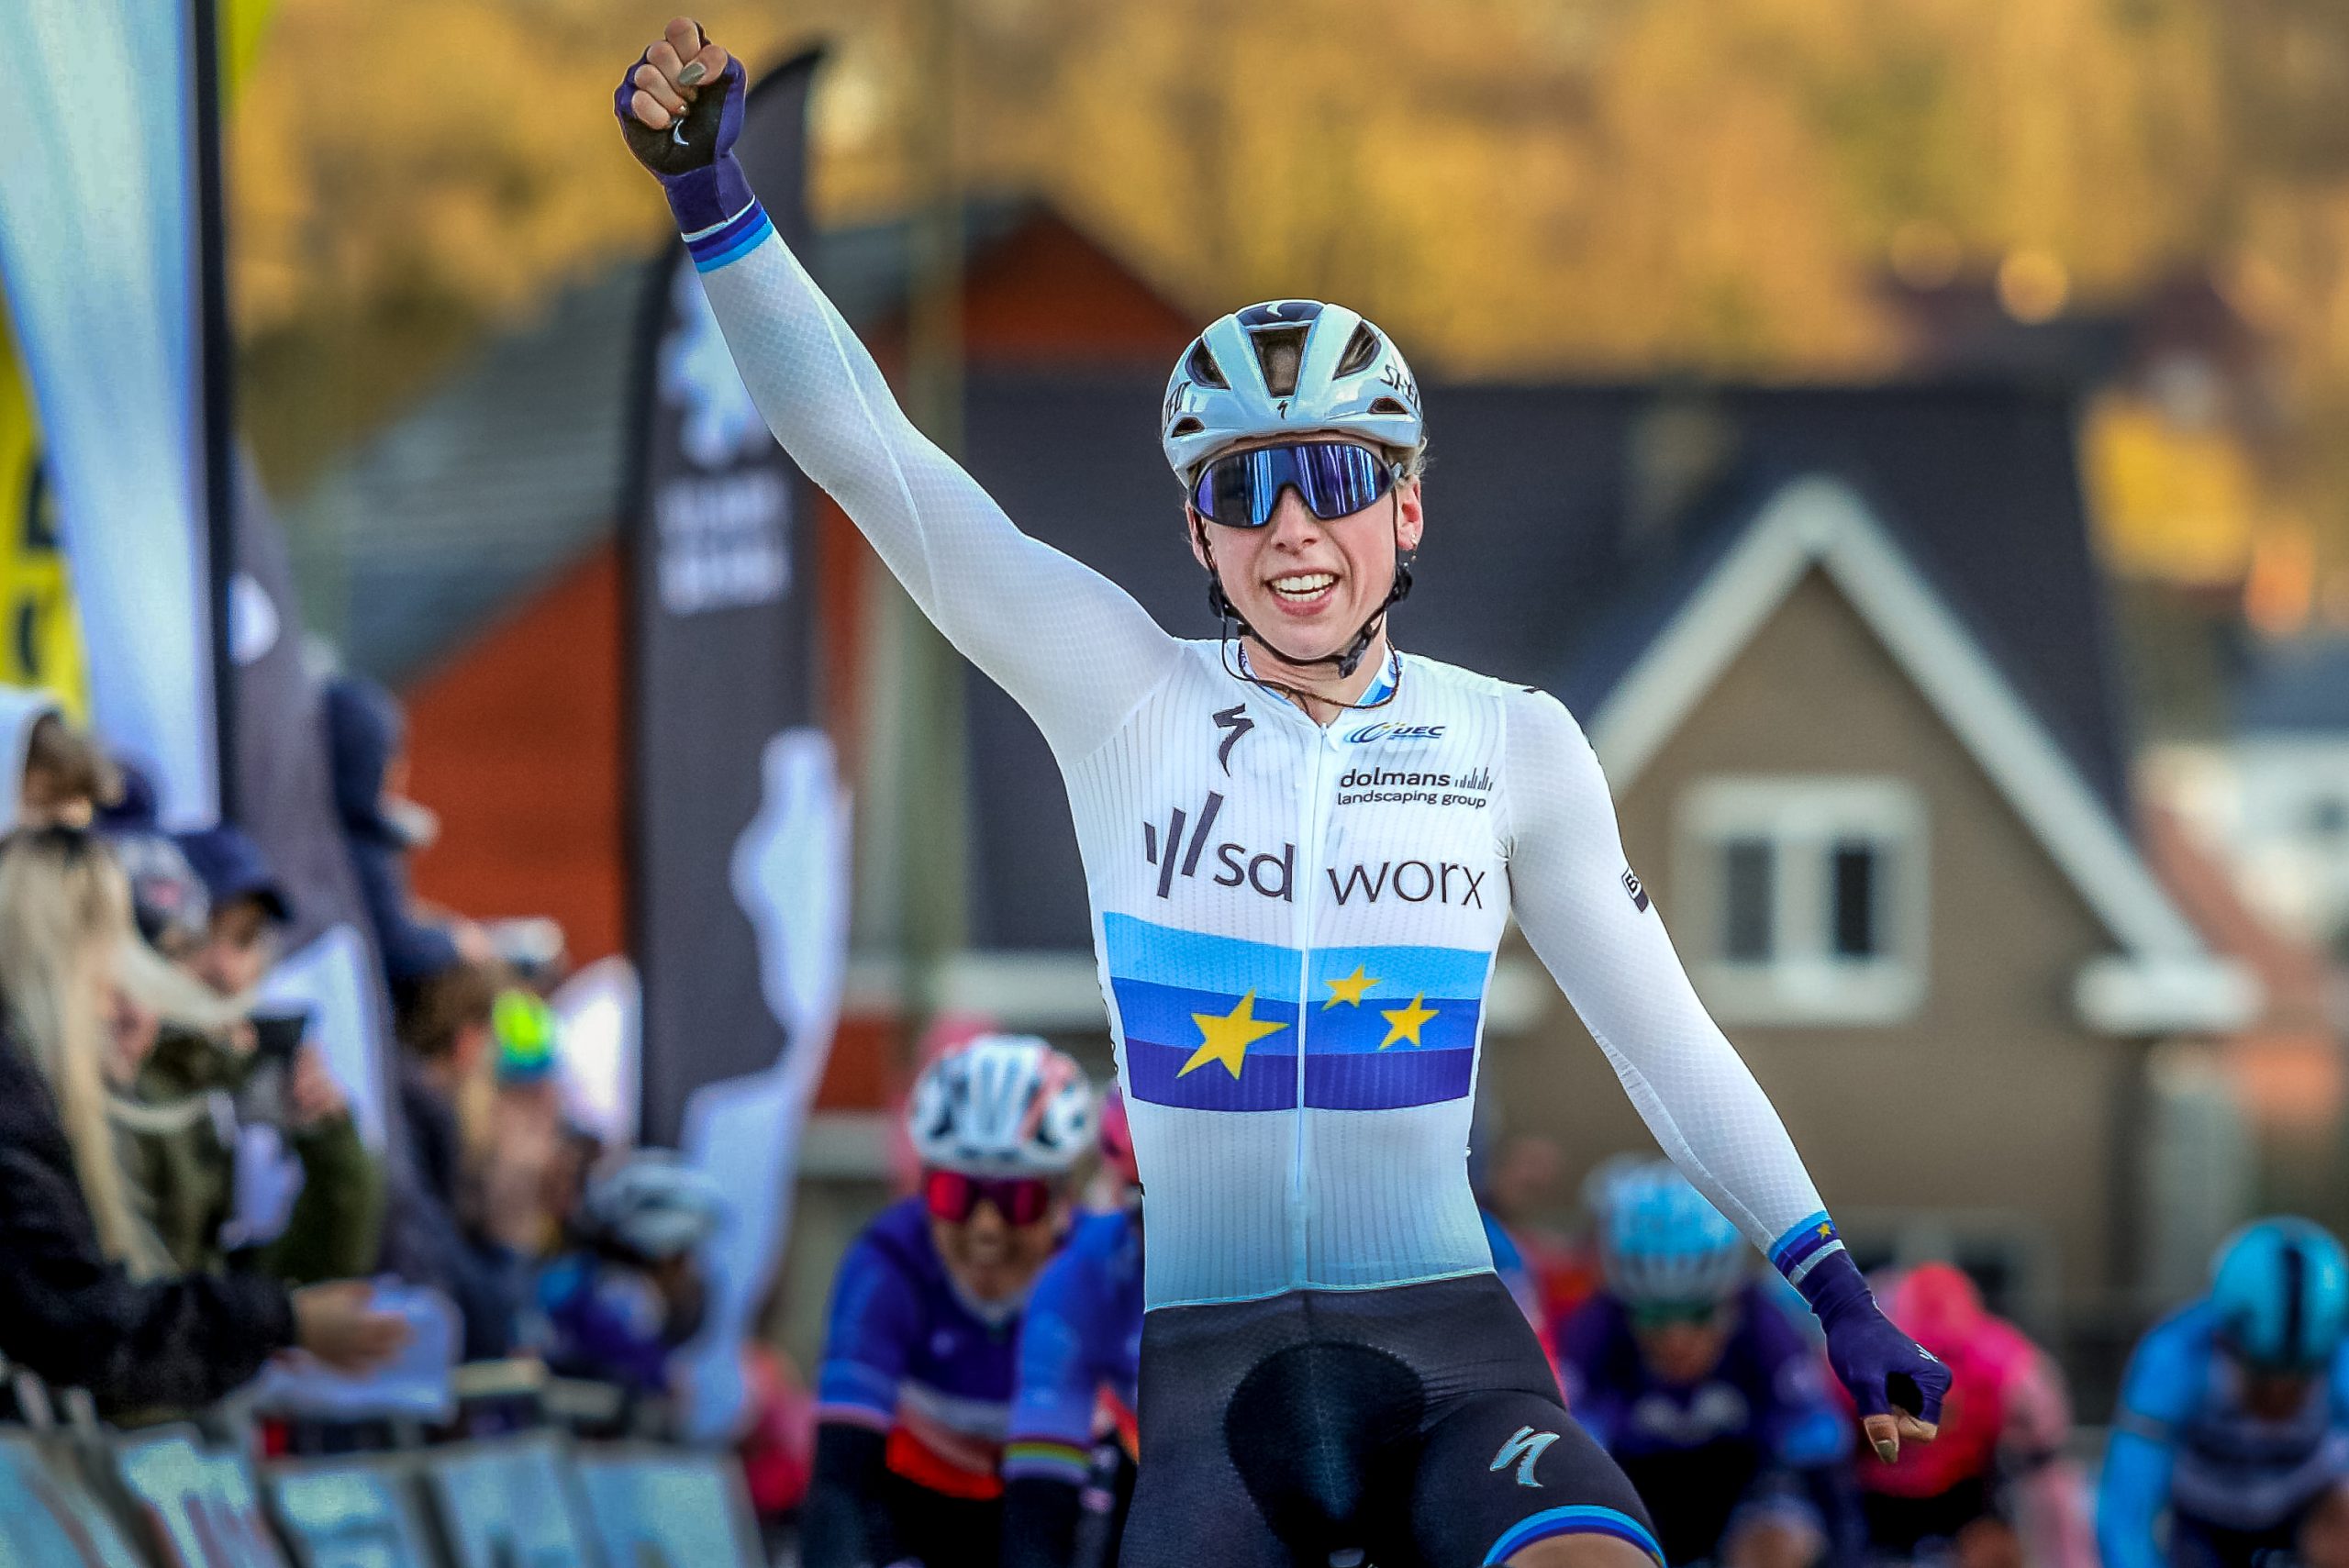 TIELT-WINGENE (BEL): CYCLING: FEBRUARY 26
Lorena Wiebes has won the Craywinkelhof Omloop van het Hageland.
Her team SD Worx called a few escapees to order - including Floortje Mackaij - after which the European champion finished it off. Last year's winner Marta Bastianelli came second.